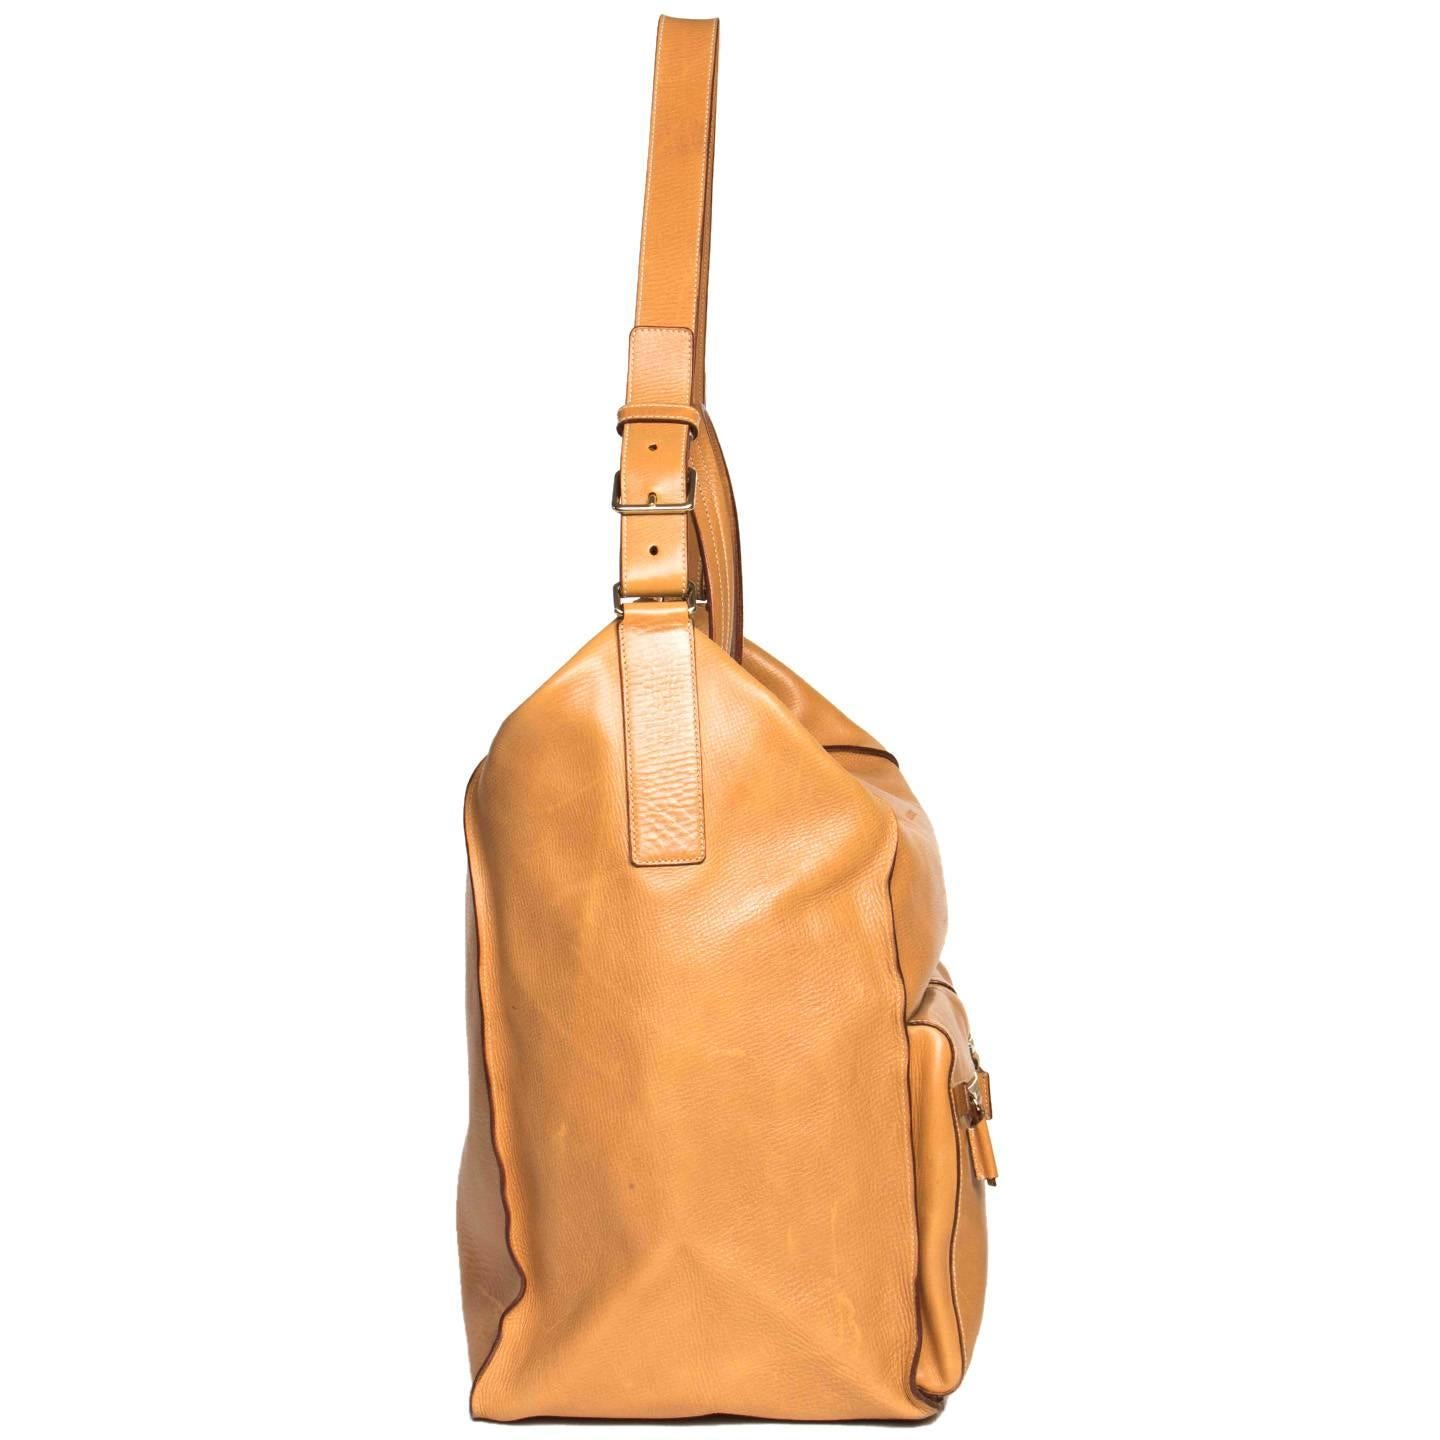 Natural textured tan colored leather large bag with a rectangular shape and camera bag style front pockets. All sections of leather are stitched together with ecru top stitches leaving the seams visible and enriched by a dark brown paint finishing.